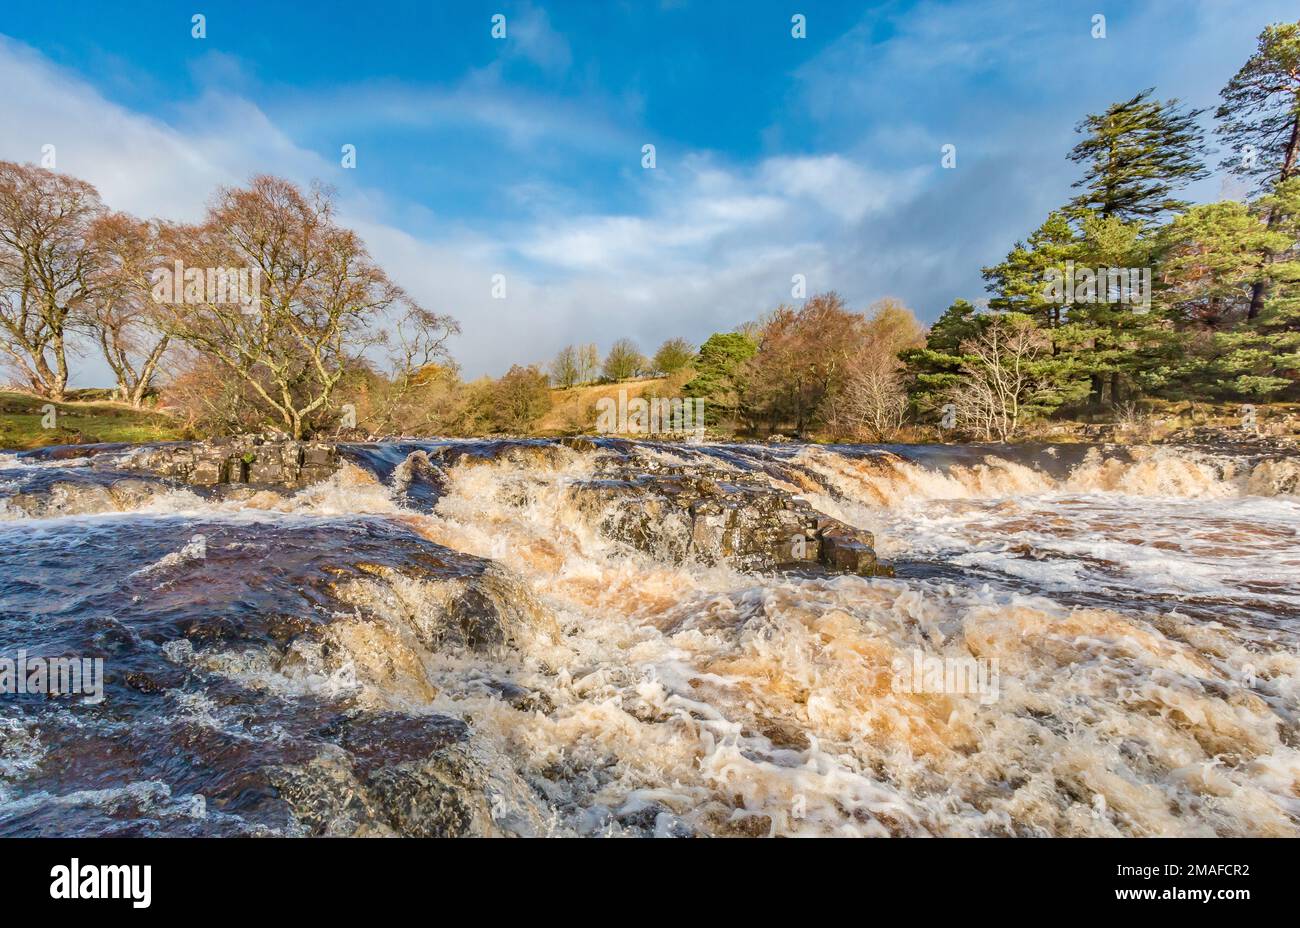 Cascades and a swollen River Tees just above the main Low Force waterfall, as seen fom the Pennine Way long distance footpath. Stock Photo